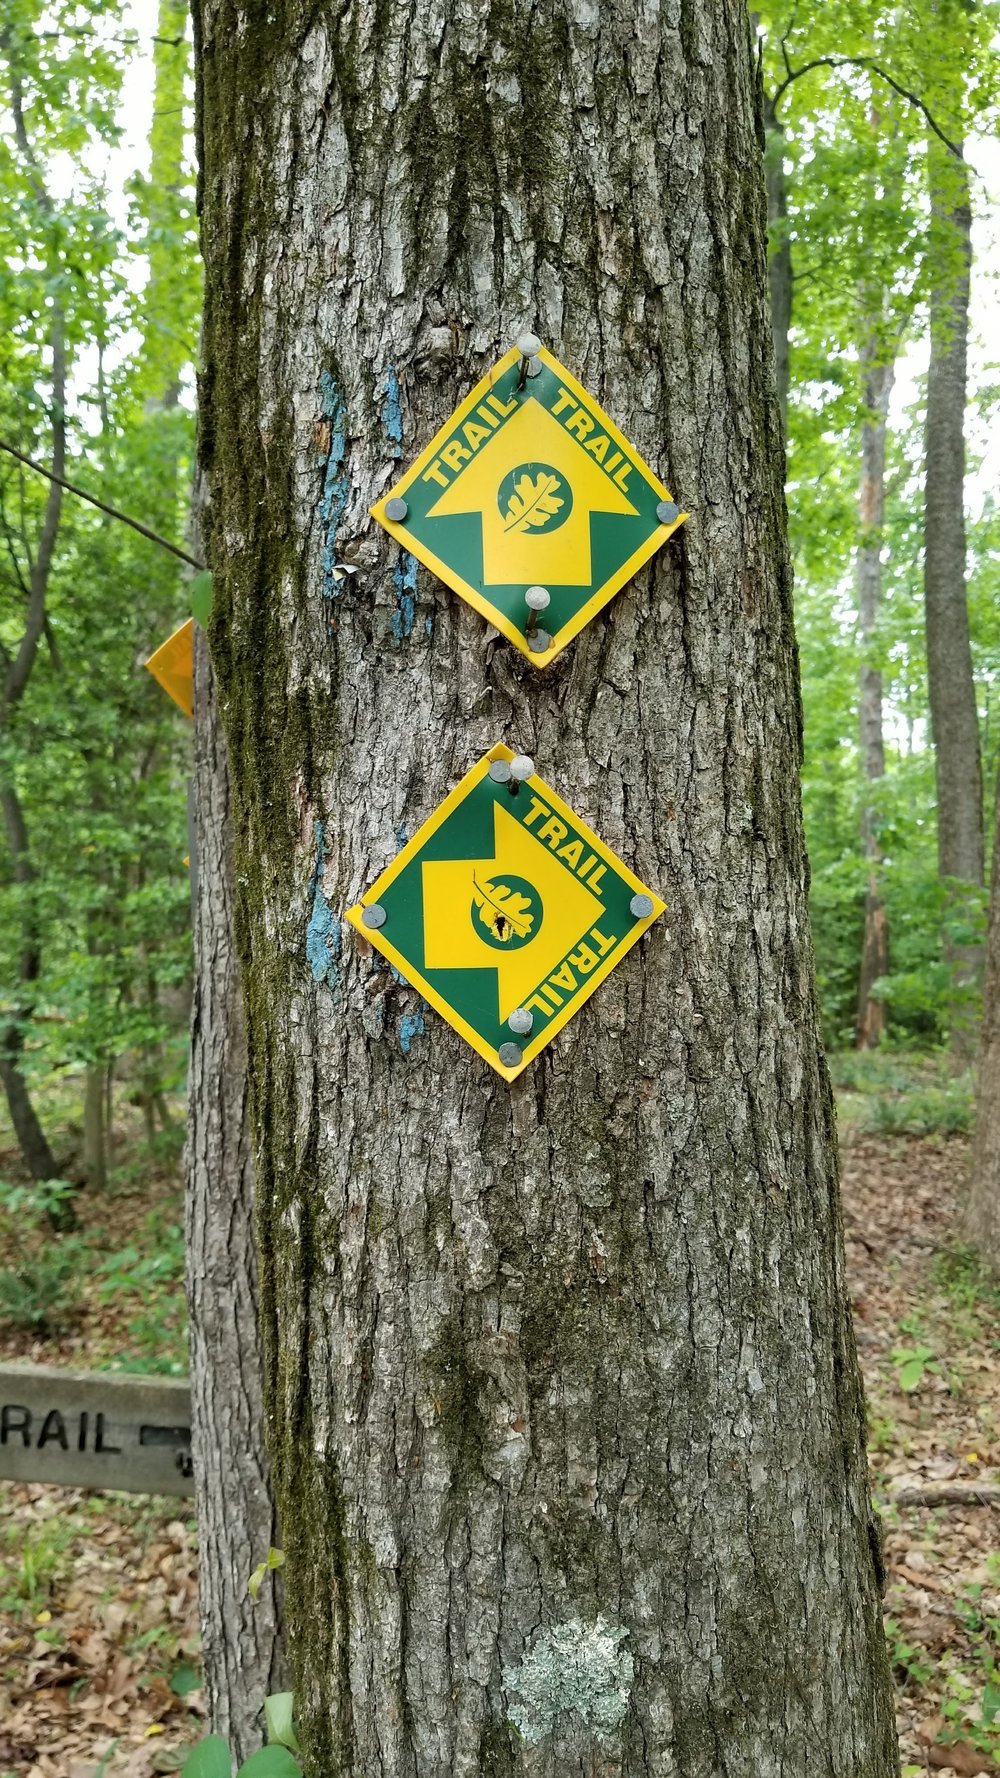 Trail markers at the junction of the Carriage Road Trail and Hollow Tree Trail